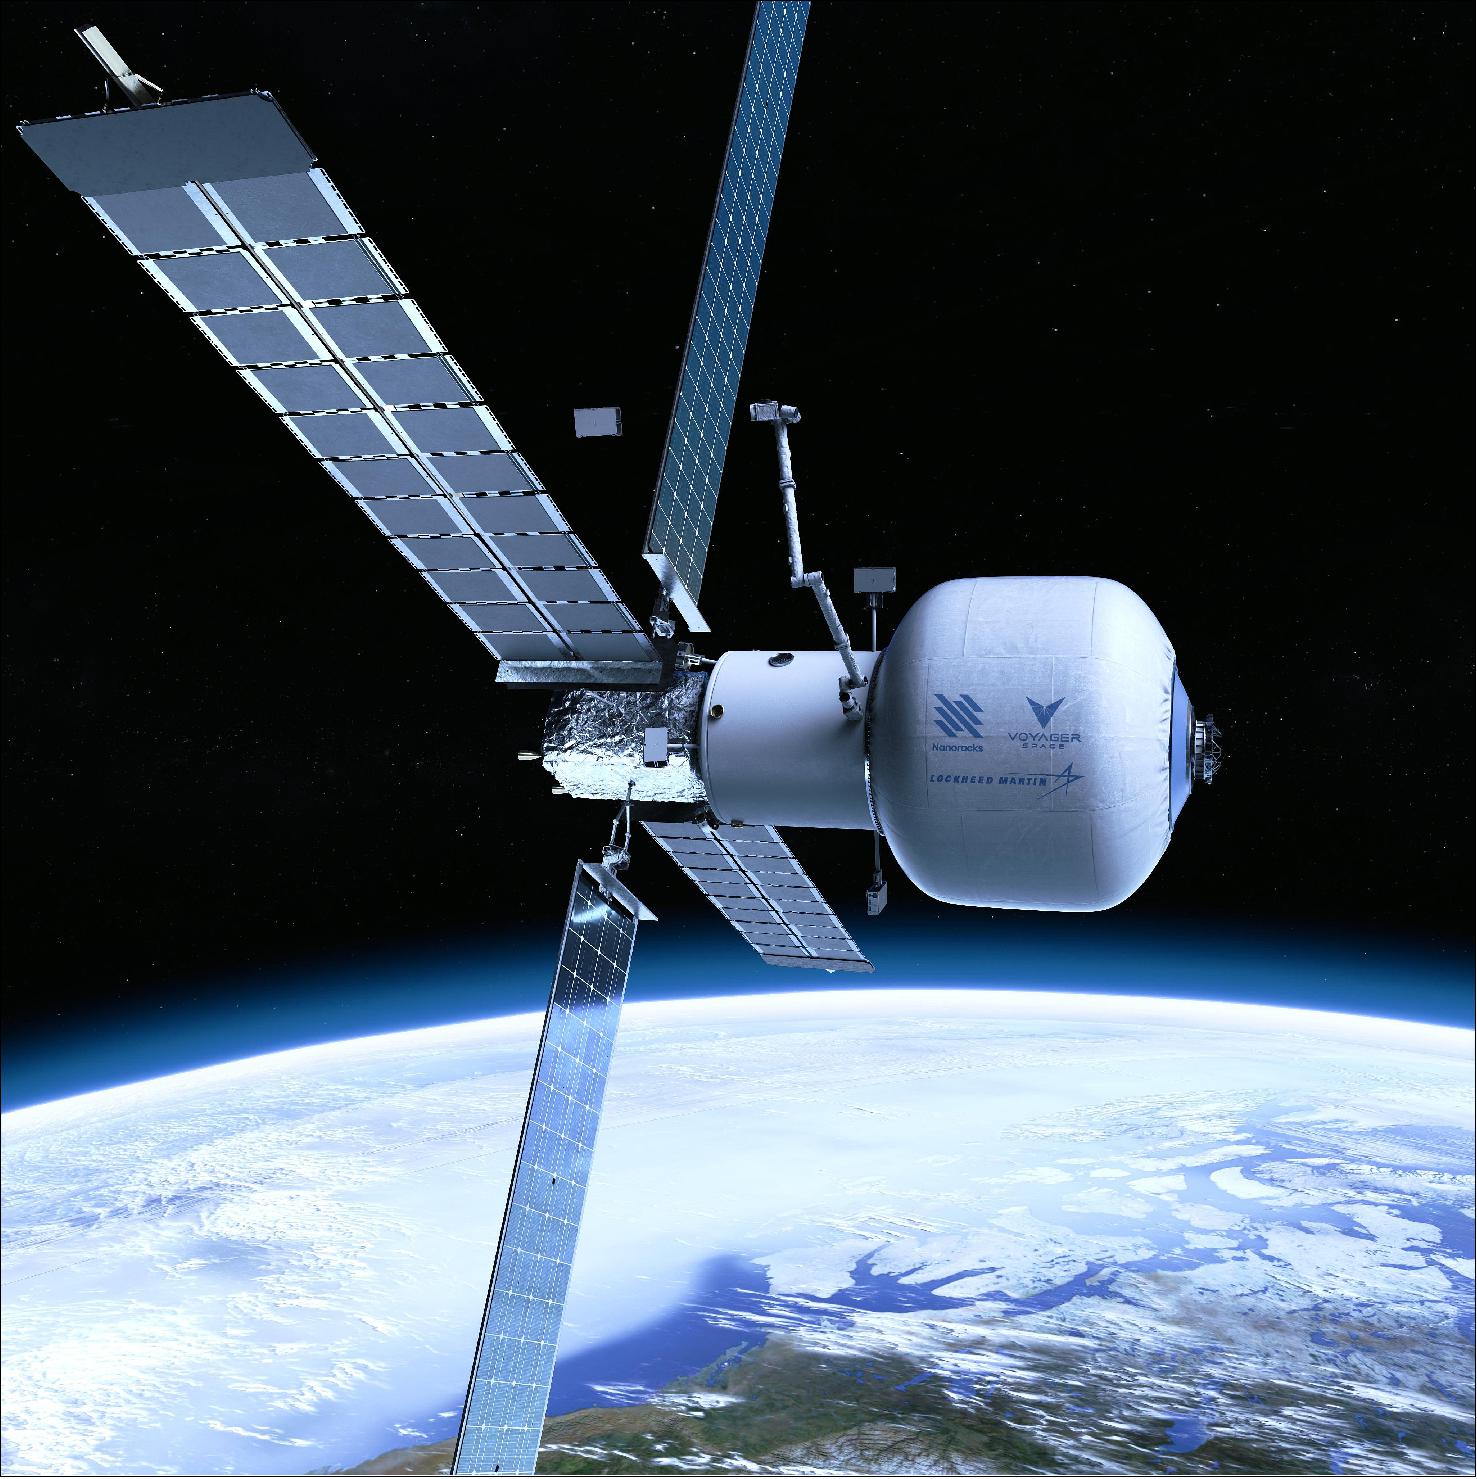 Figure 4: Starlab, a commercial low-Earth orbit space station is being planned for use by 2027 (image credit: Nanoracks)